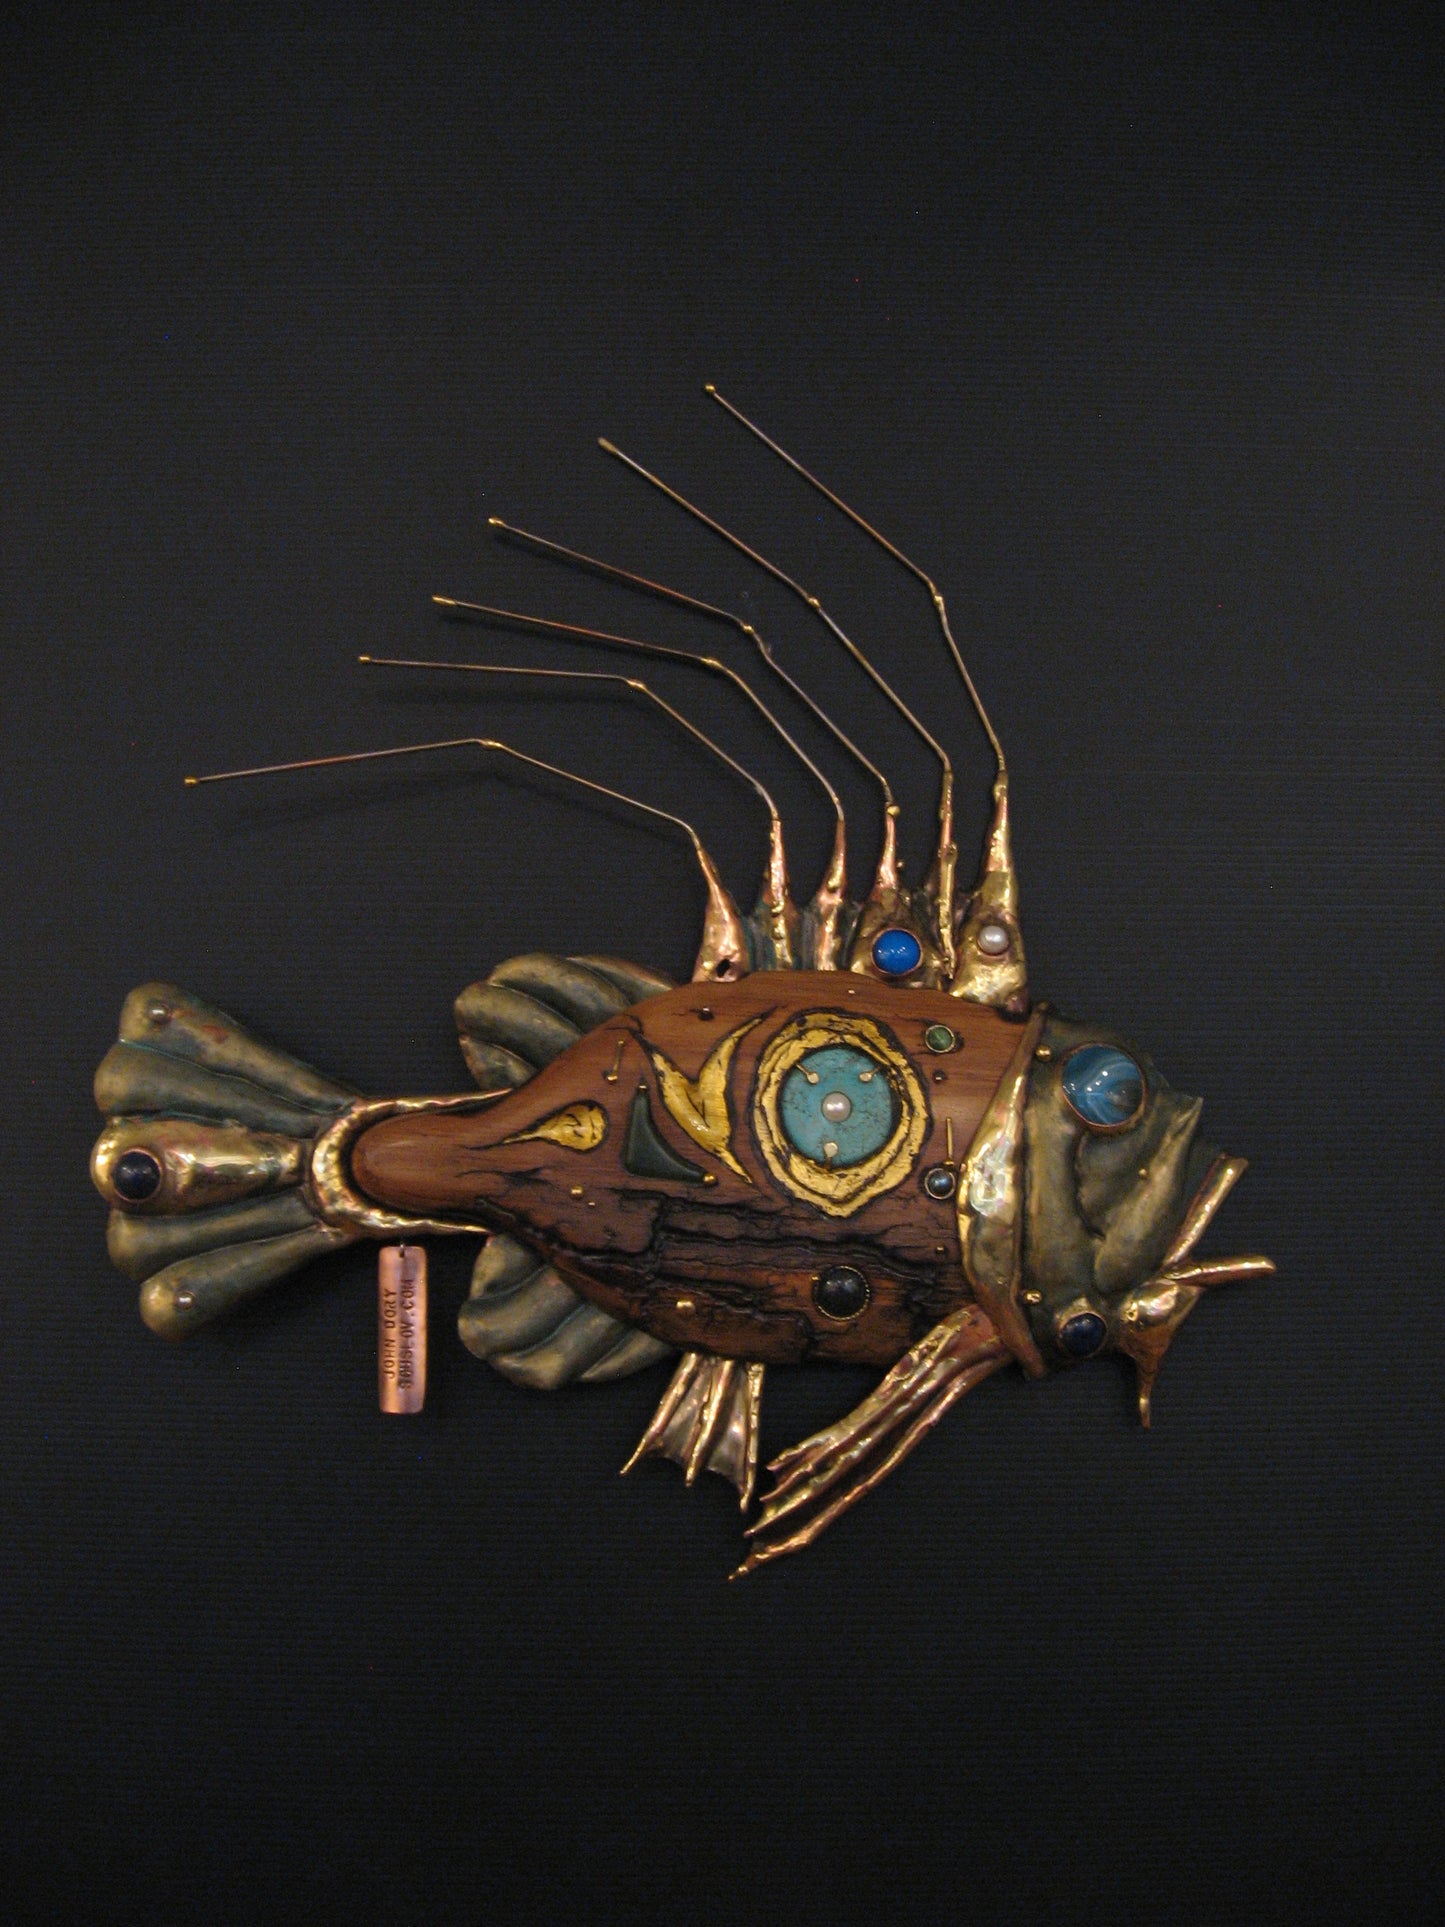 John Dory Fish Wall Art of Metal and Wood by Serge Souslov Silver Fern Gallery